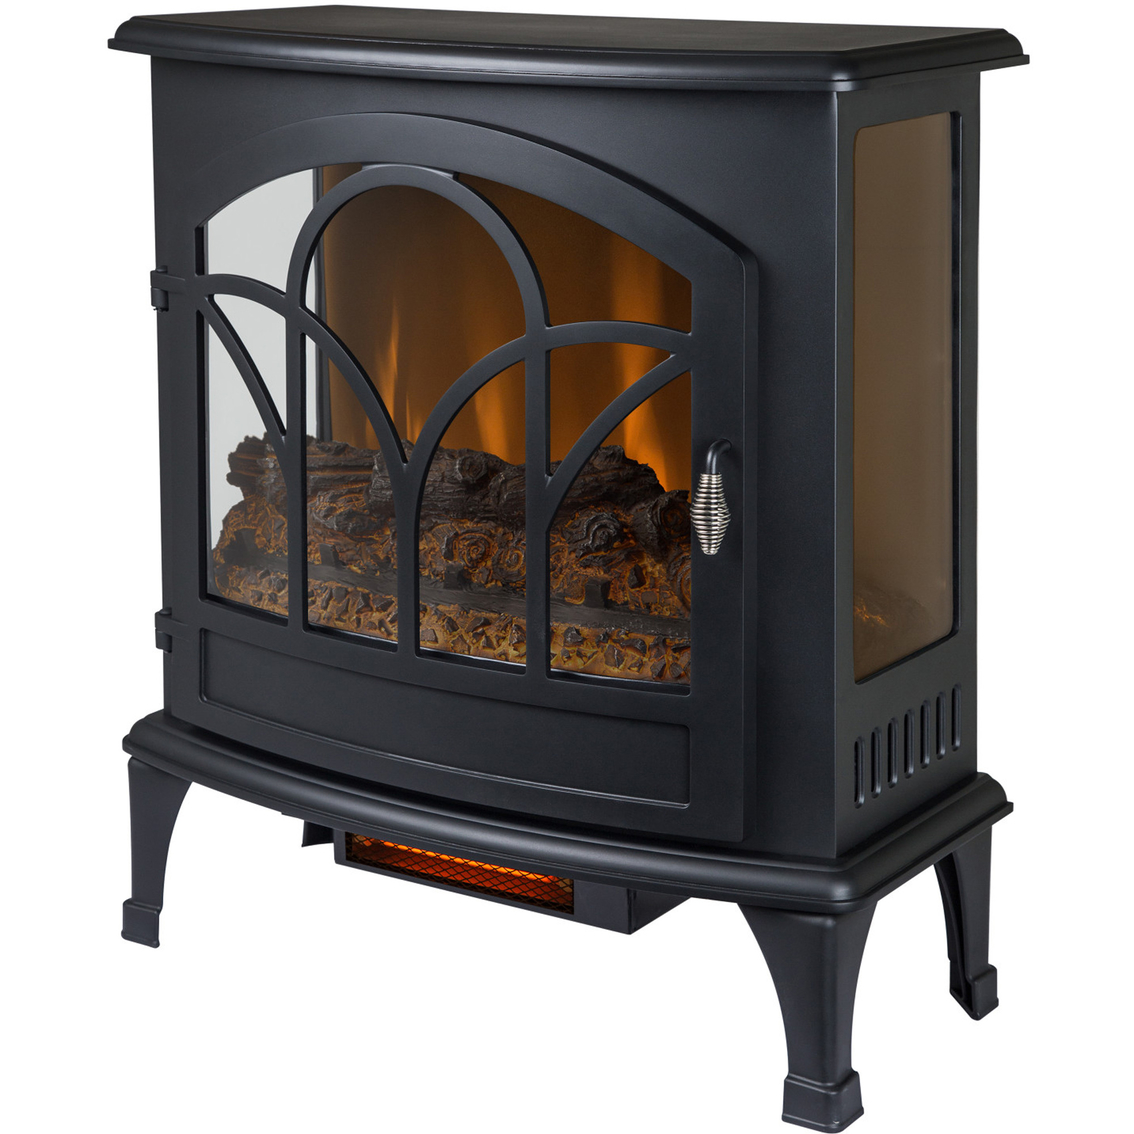 Muskoka 25 in. Curved Infrared Electric Stove